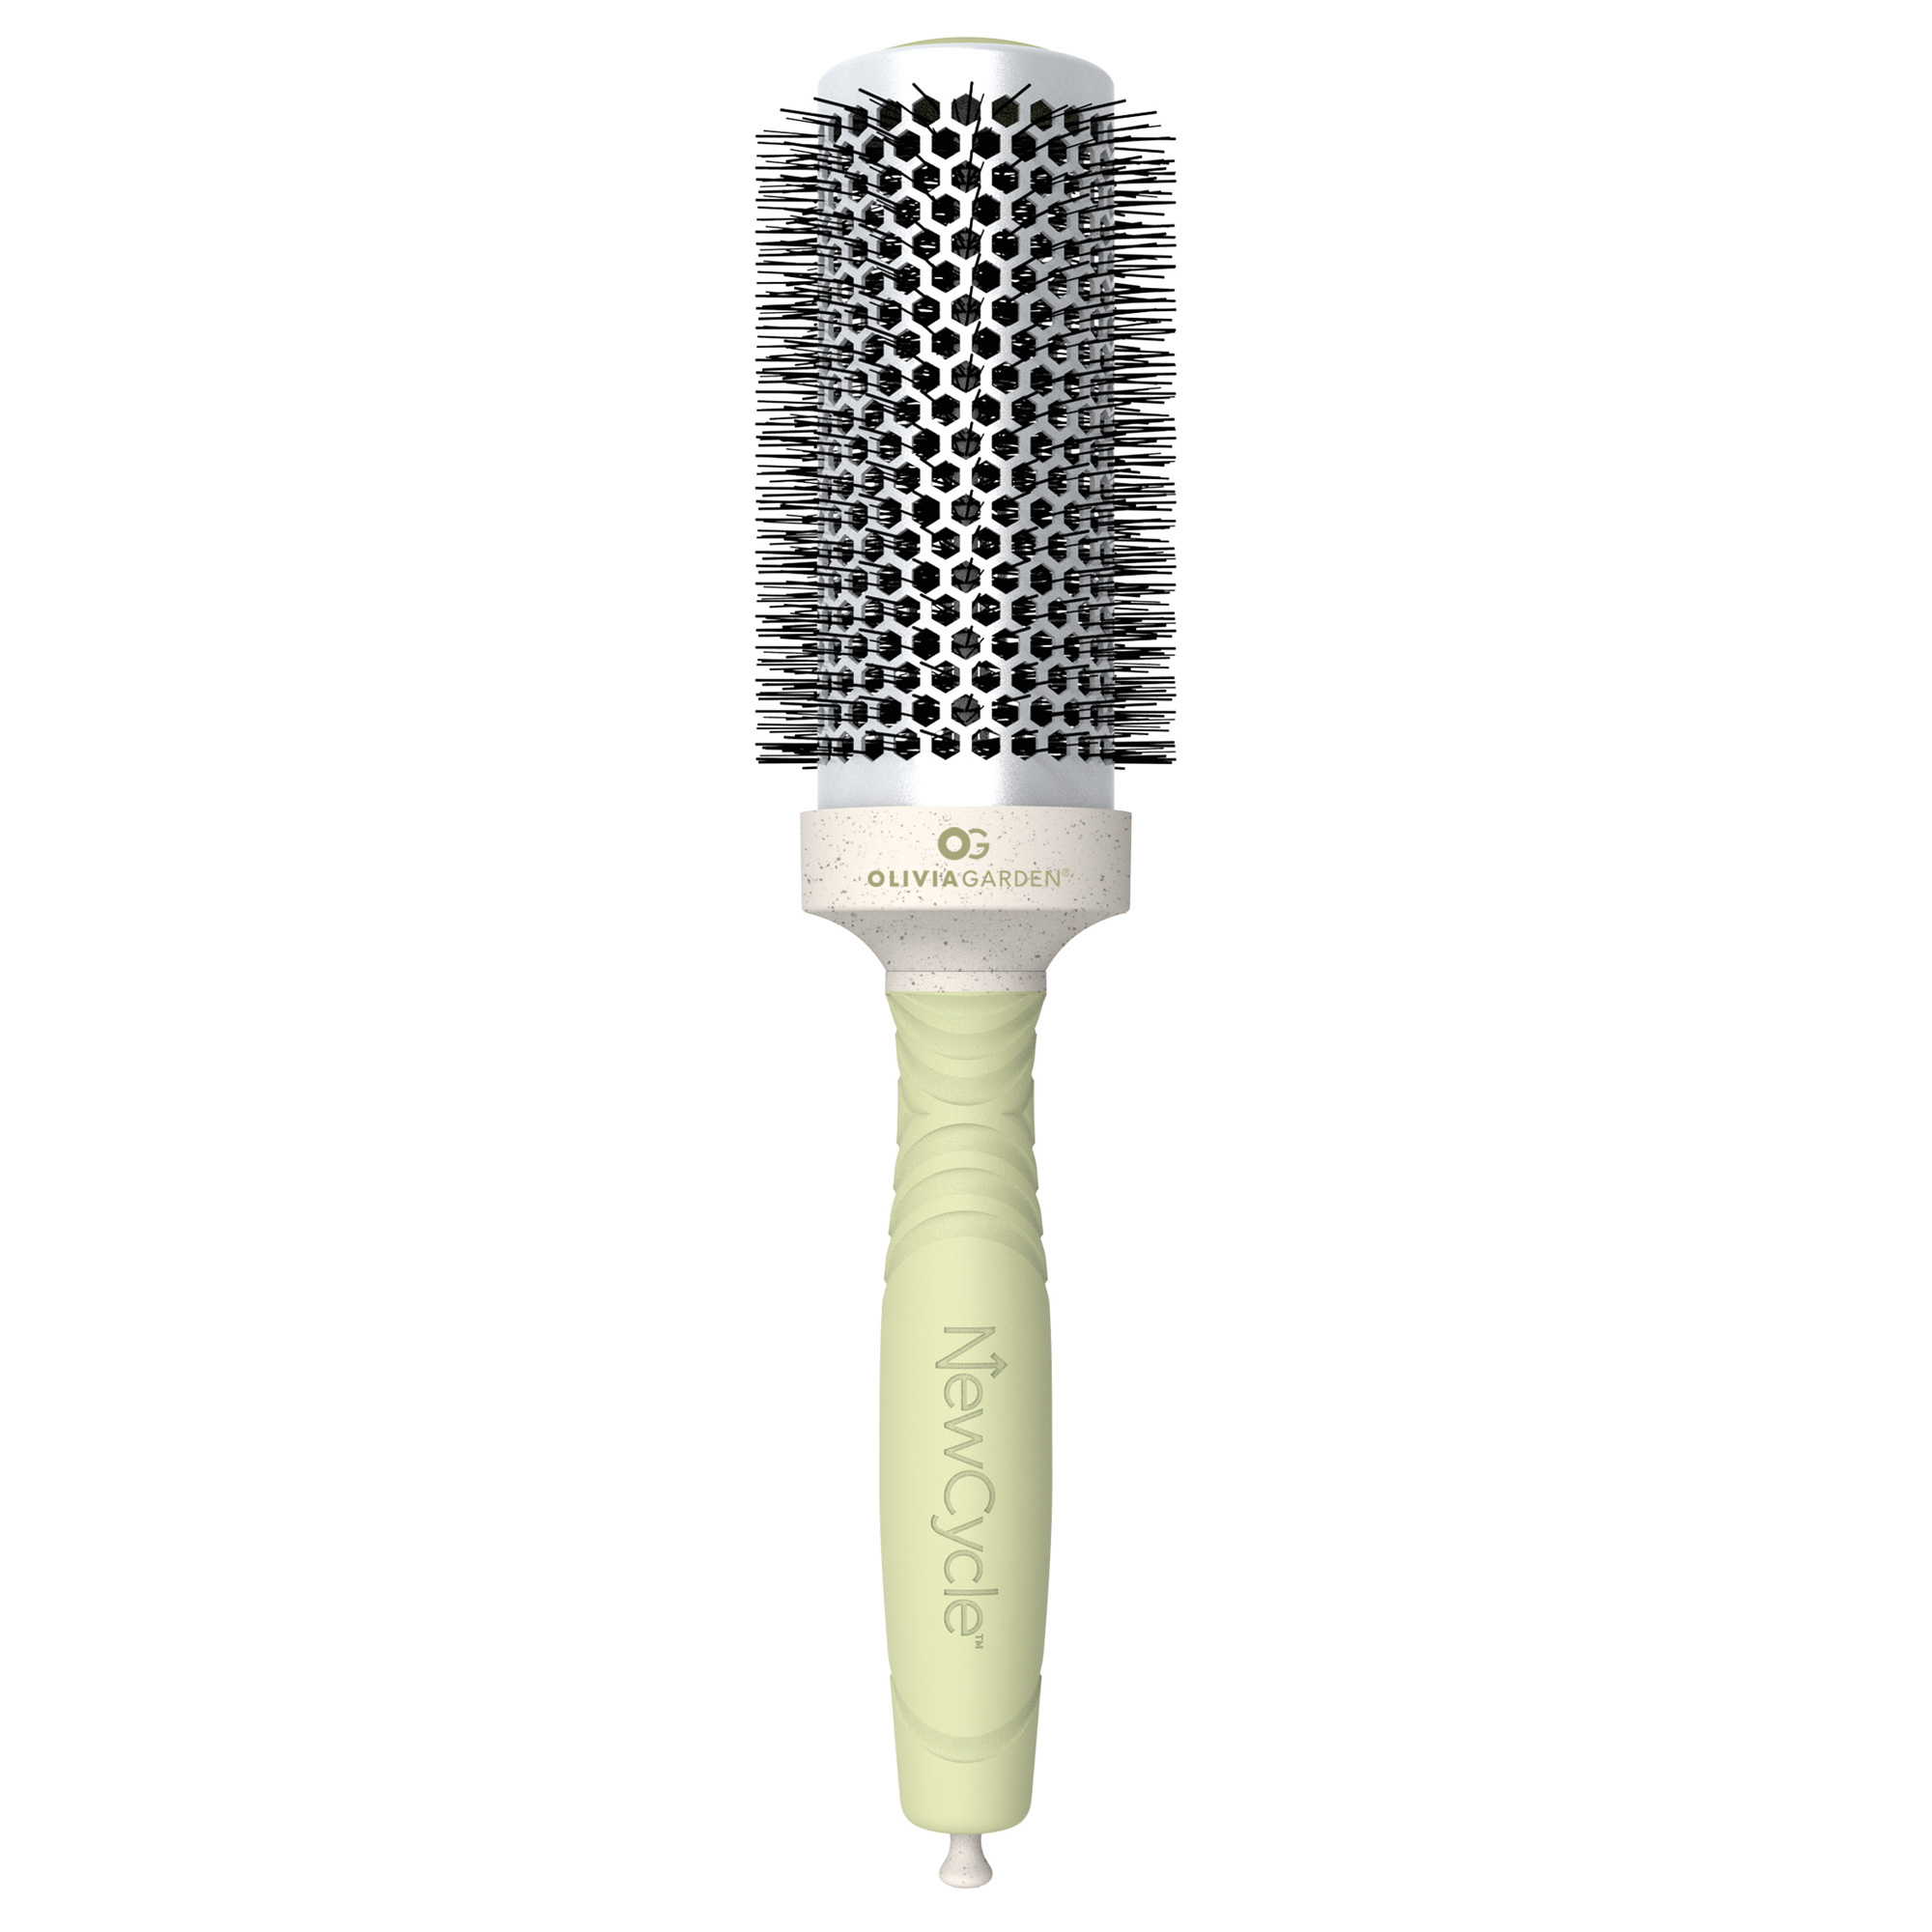 Olivia Garden New Cycle Thermal Brush 1-5/8"